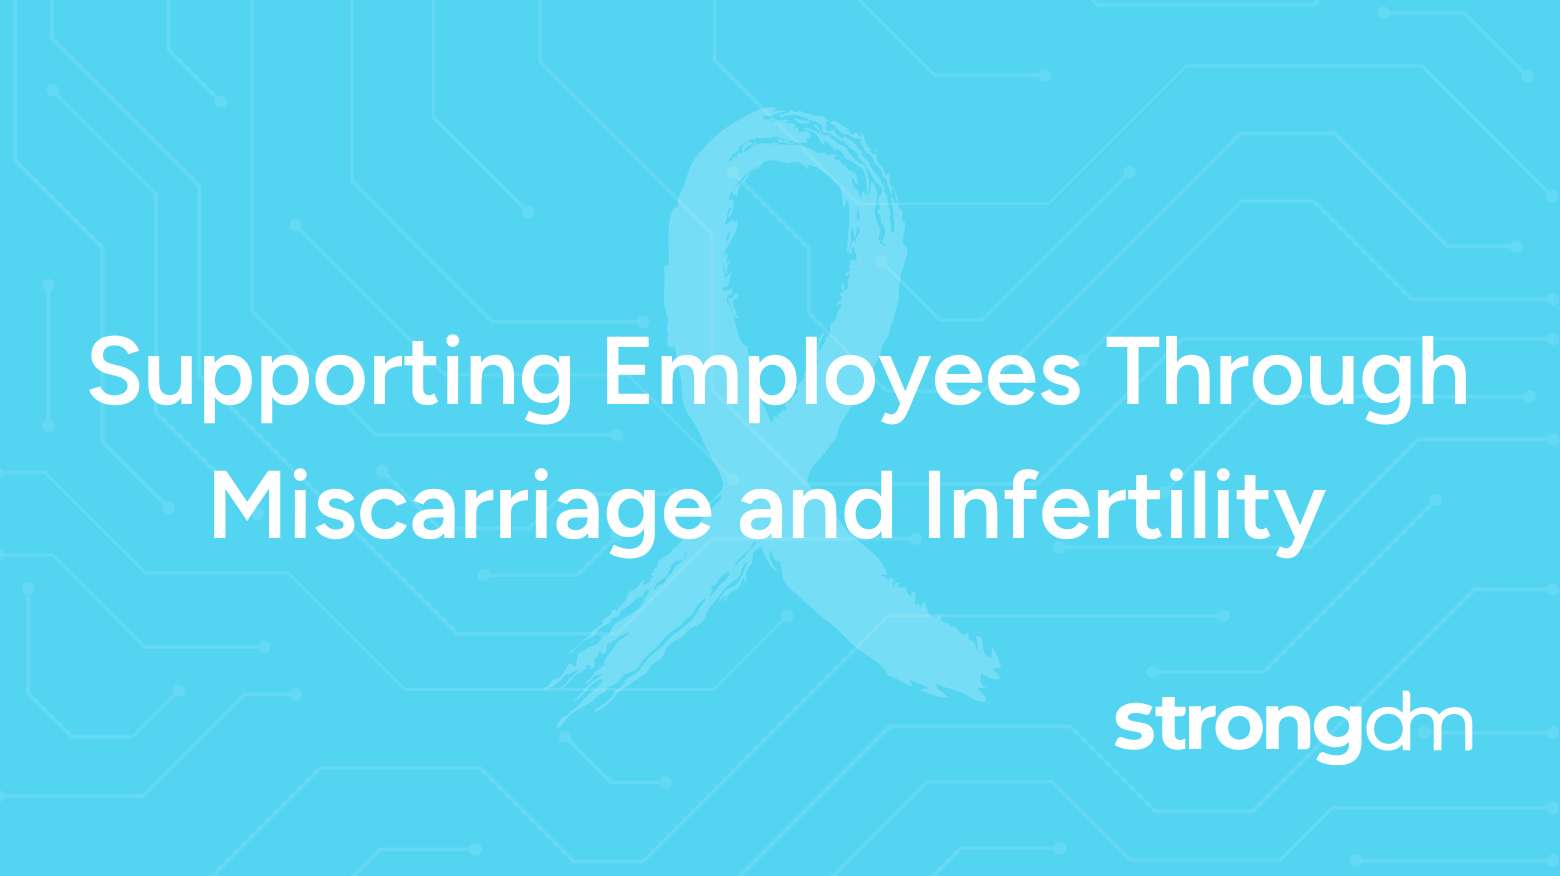 Infertility, Miscarriage, and the Workplace: Why Sick Time Isn’t Enough and How Companies Can Fix It